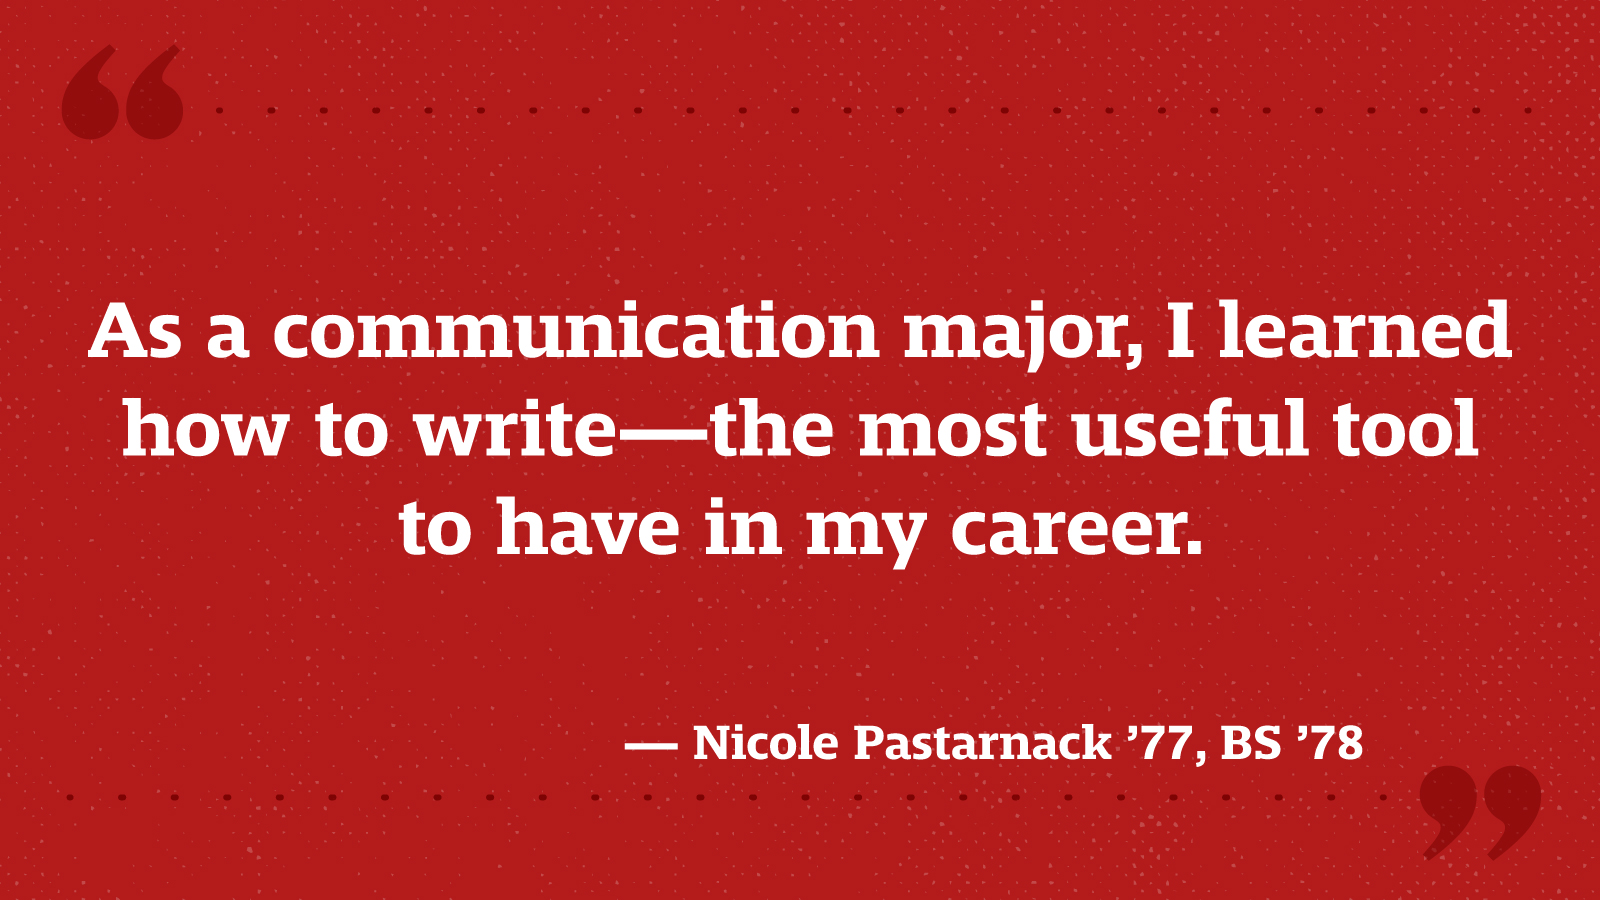 As a communication major, I learned how to write—the most useful tool to have in my career. — Nicole Pastarnack ’77, BS ’78